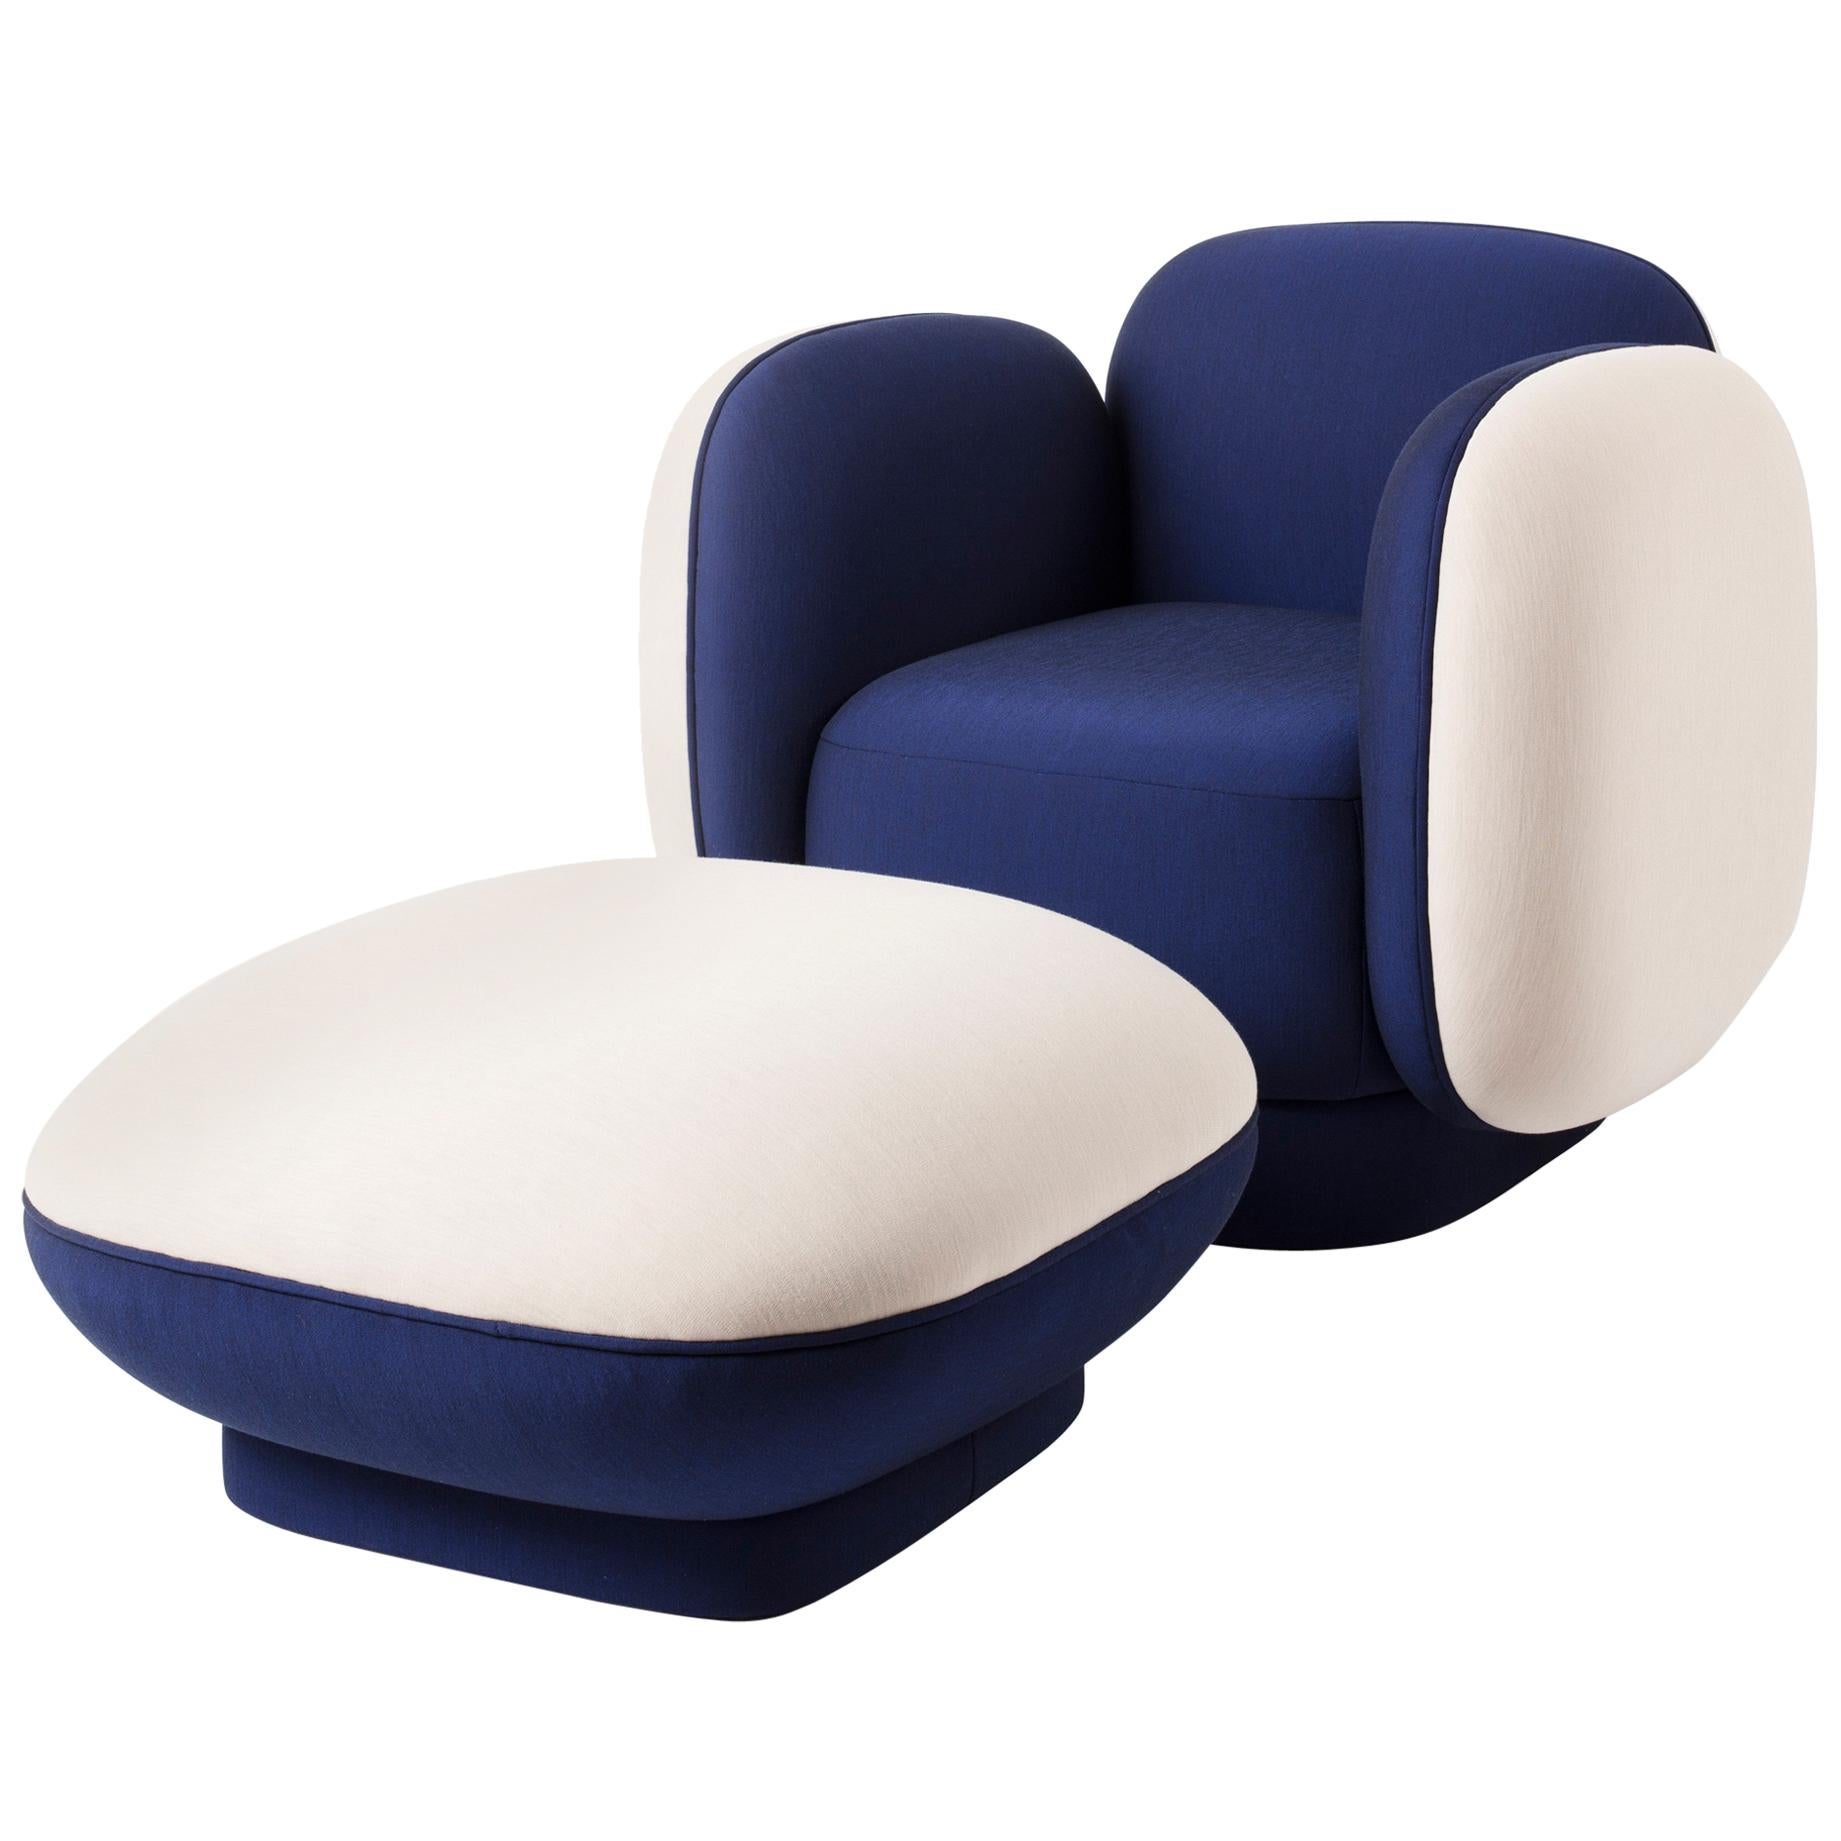 Space Oddity Armchair and Ottoman Designed by Thomas Dariel